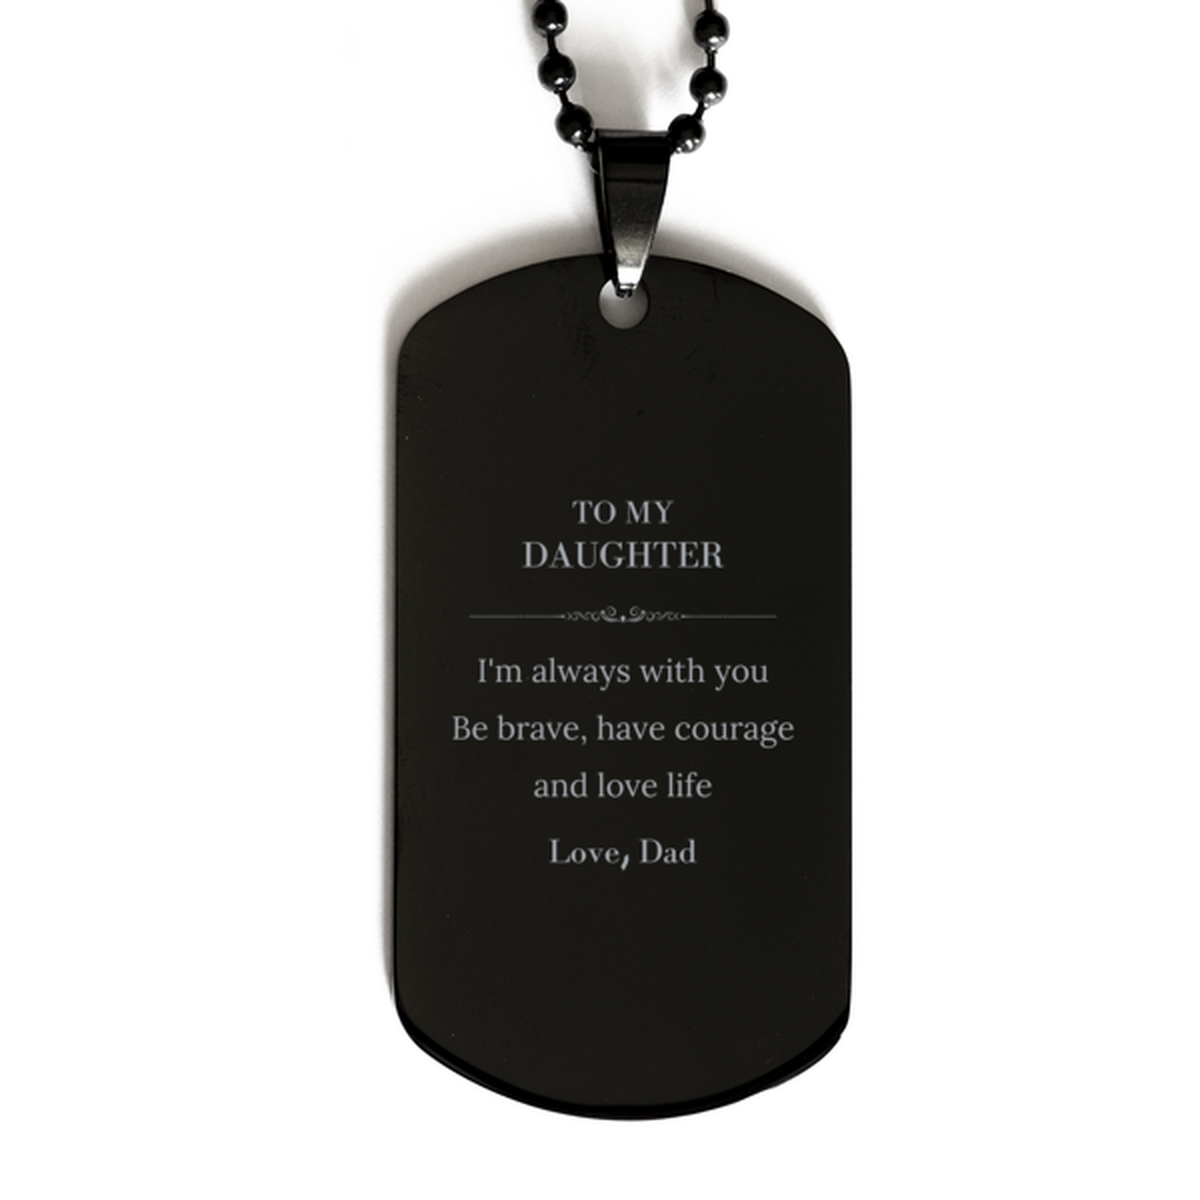 To My Daughter Gifts from Dad, Unique Black Dog Tag Inspirational Christmas Birthday Graduation Gifts for Daughter I'm always with you. Be brave, have courage and love life. Love, Dad